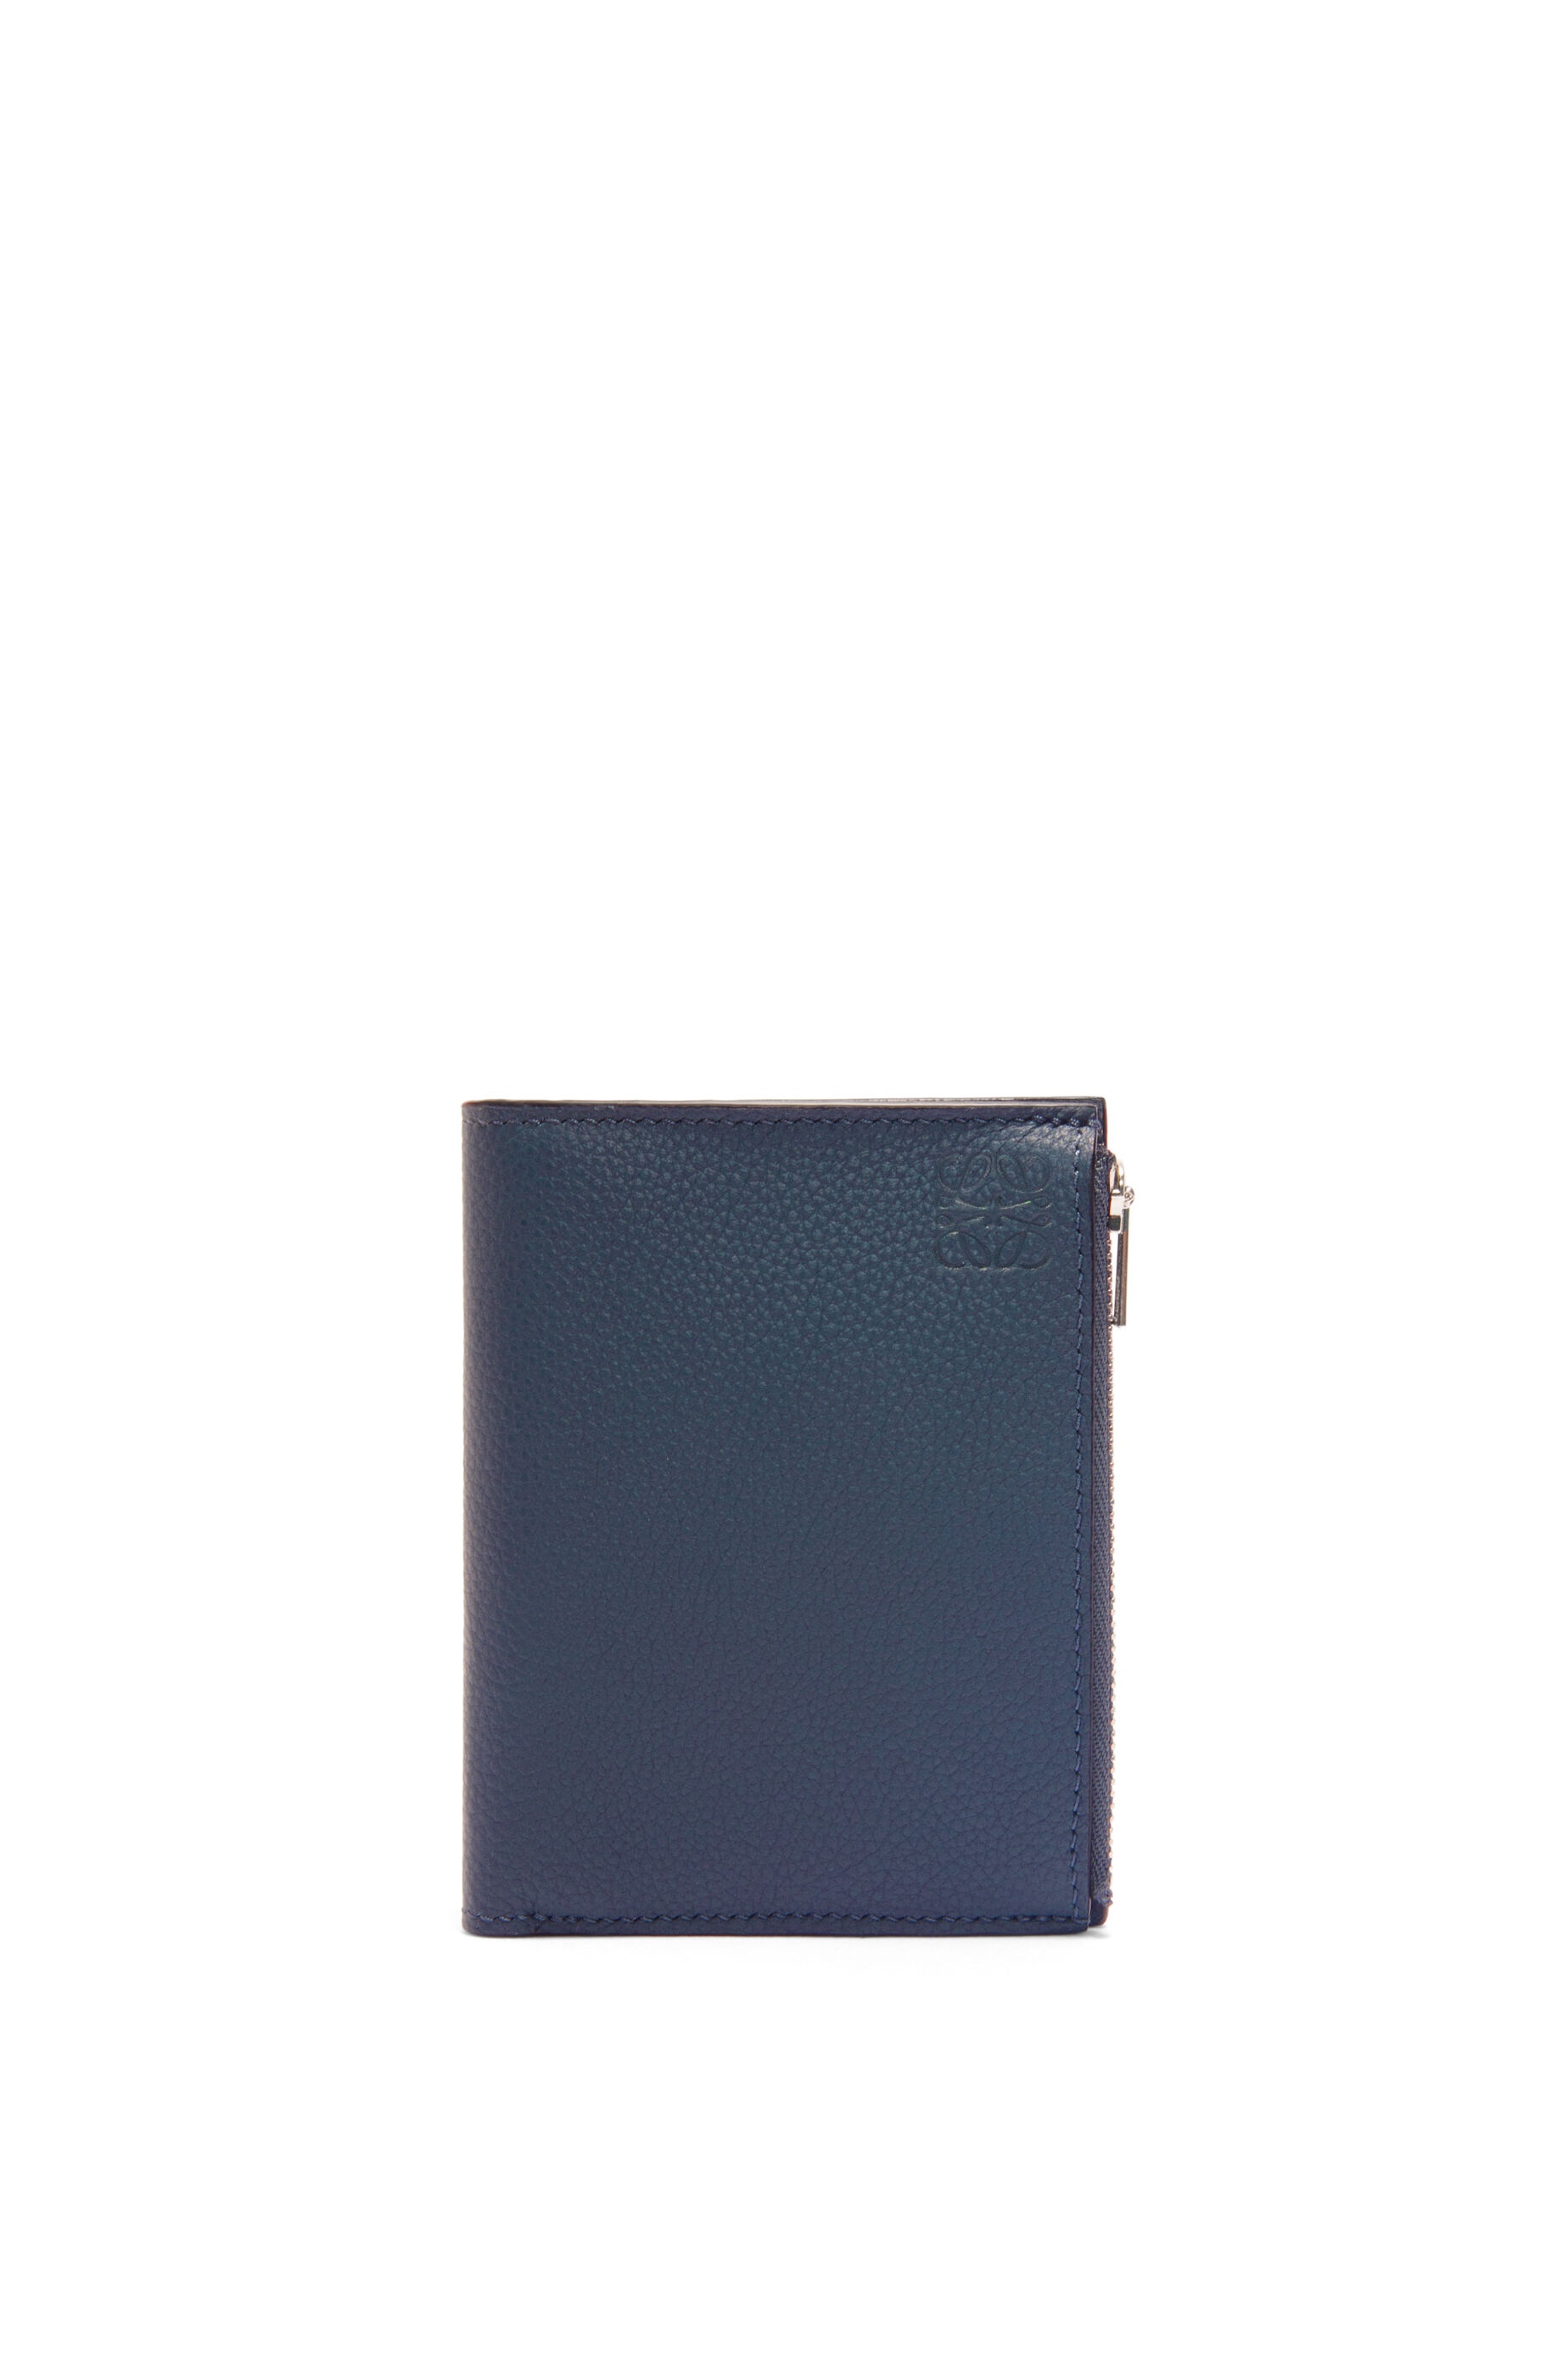 Slim compact wallet in soft grained calfskin - 1